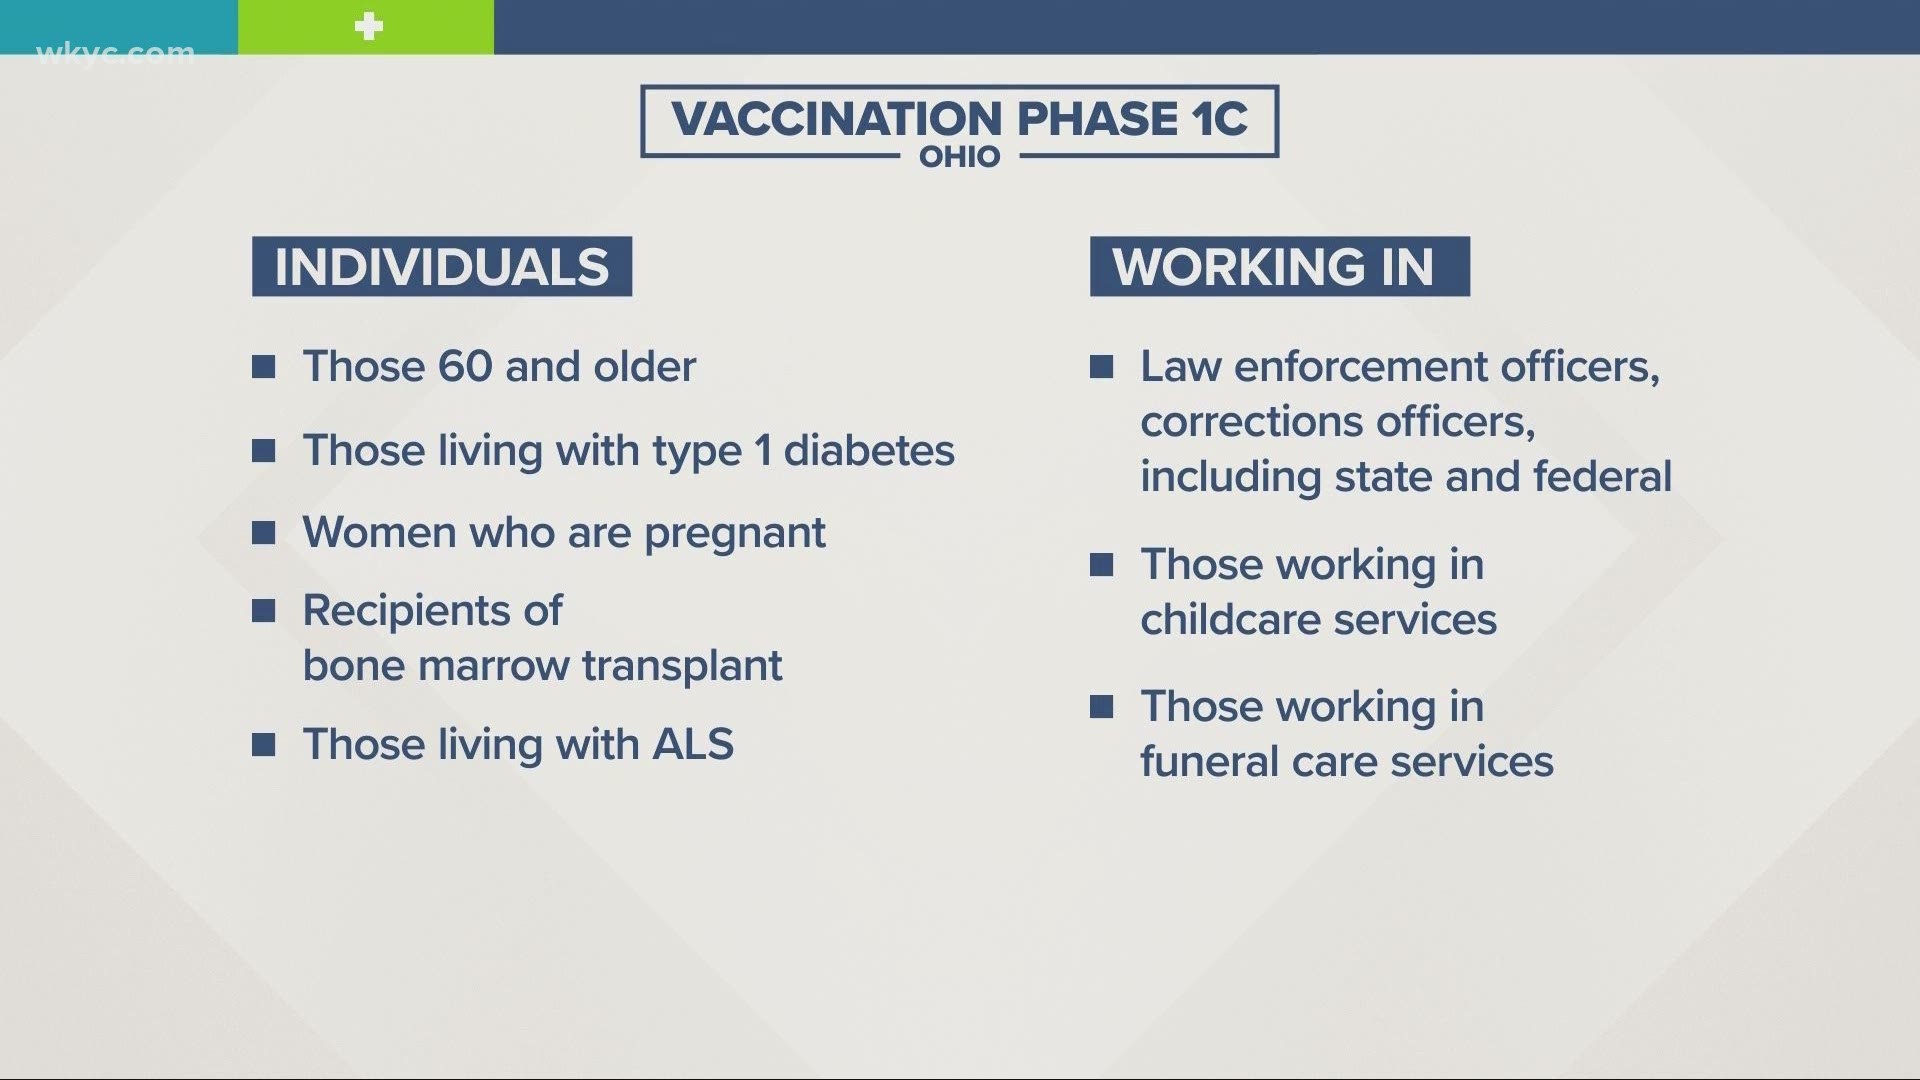 DeWine announced the next phase of the state's distribution of the COVID-19 vaccine. Laura Caso has a rundown of a busy briefing from the governor.